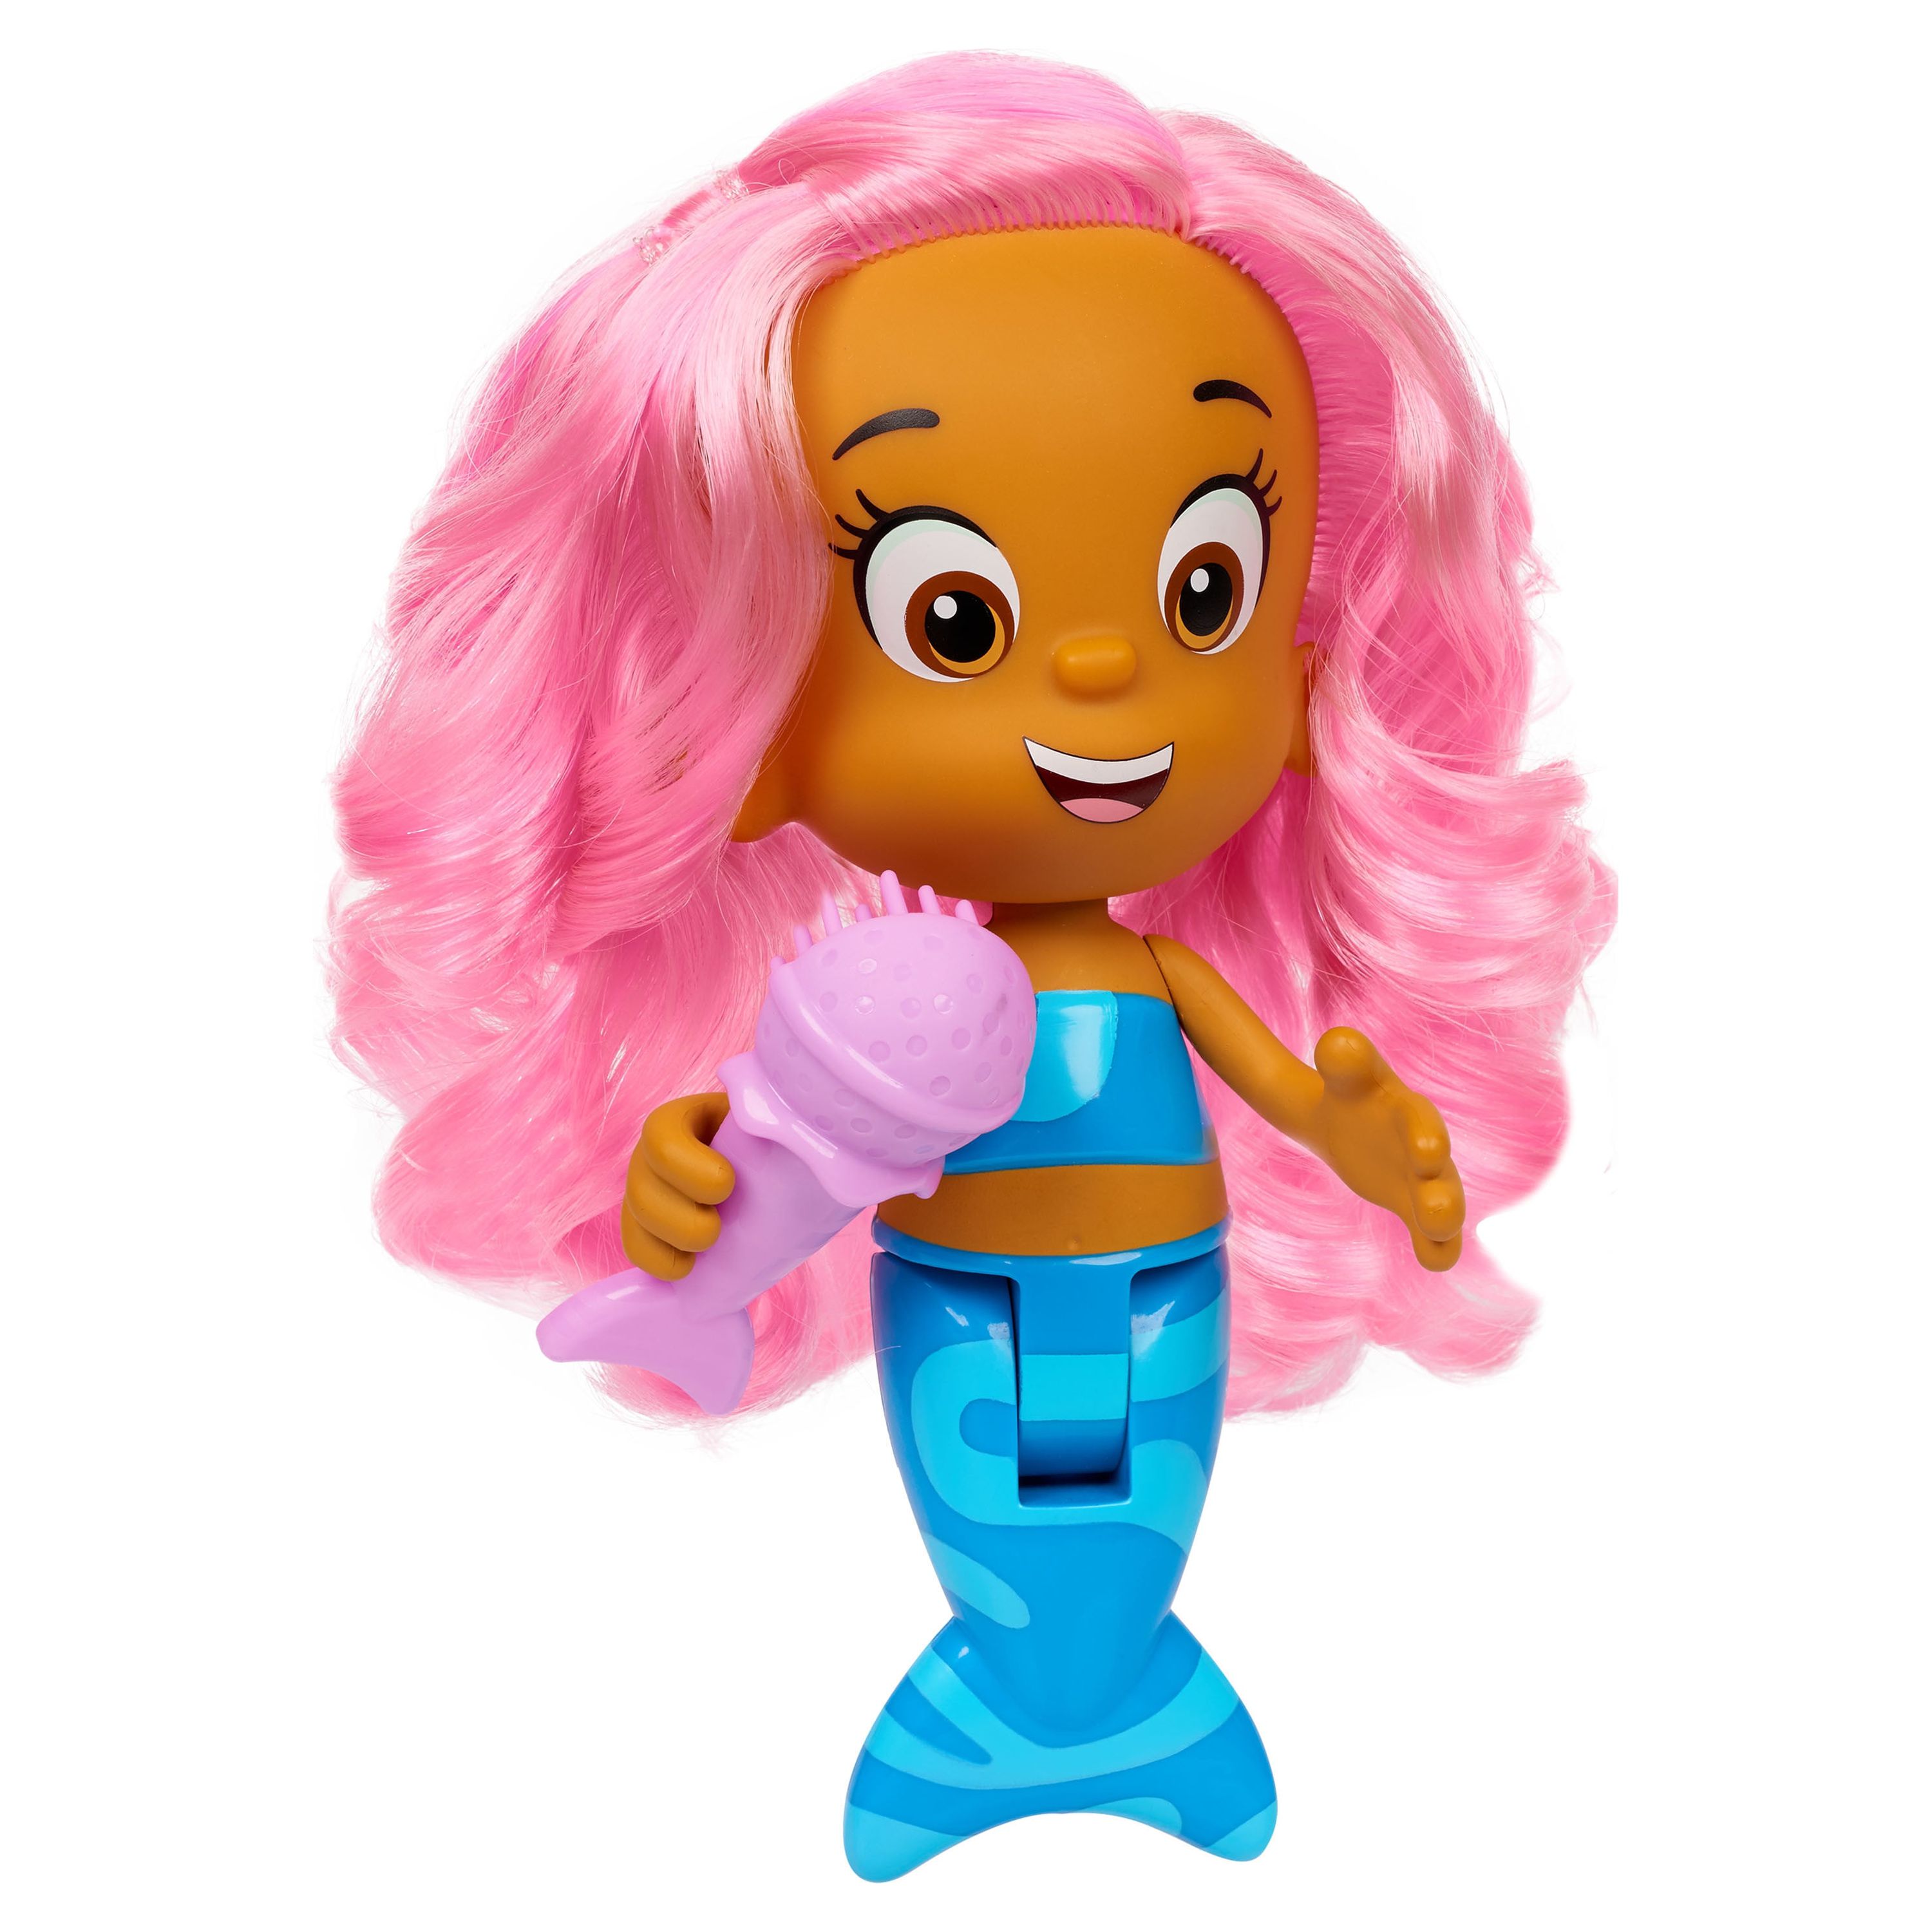 Bubble Guppies Splash and Surprise Molly Bath Doll,  Kids Toys for Ages 3 Up, Gifts and Presents - image 3 of 5